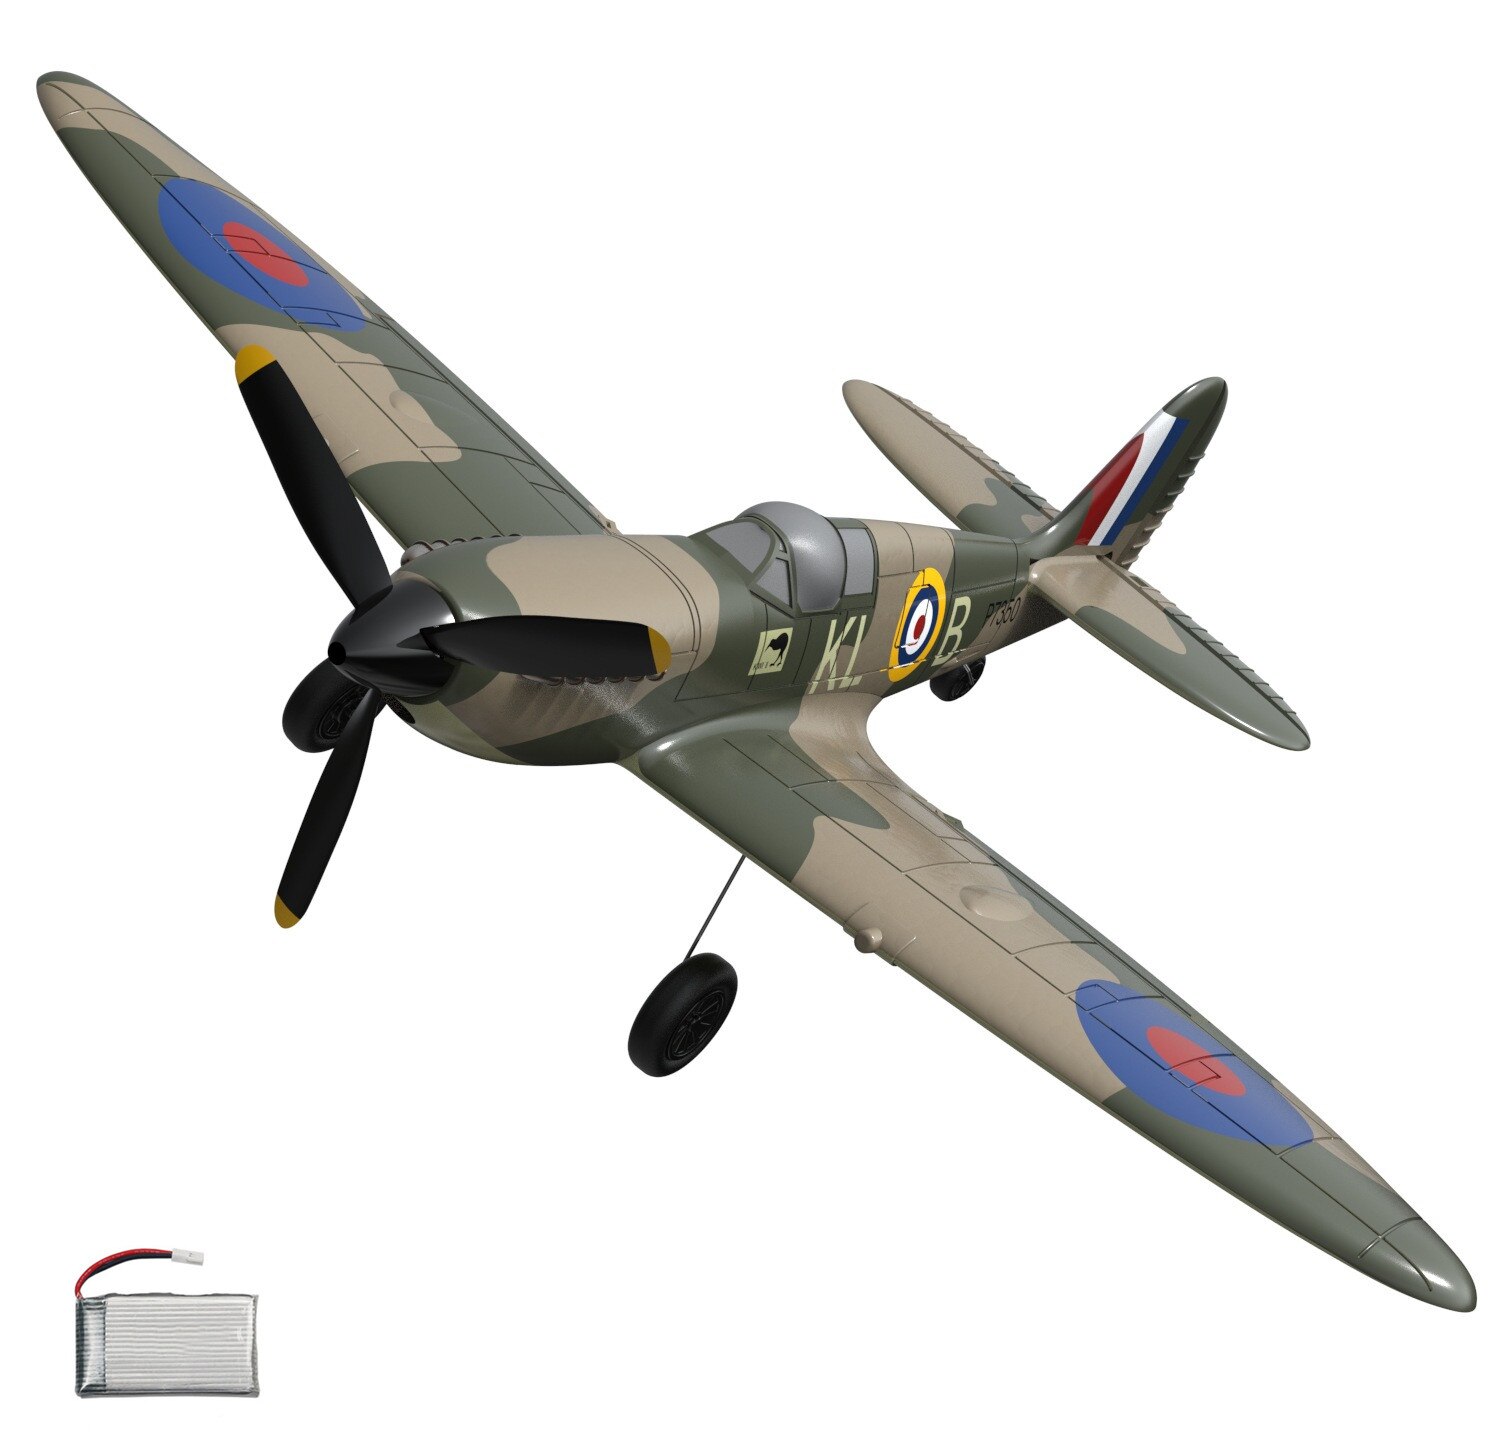 Brand New Arrival Volantex Remote Control 2.4G 4 Channels 761-12 Spitfire RC Warbird Mini Plane RTF Christmas Toy Gifts for Kids alx